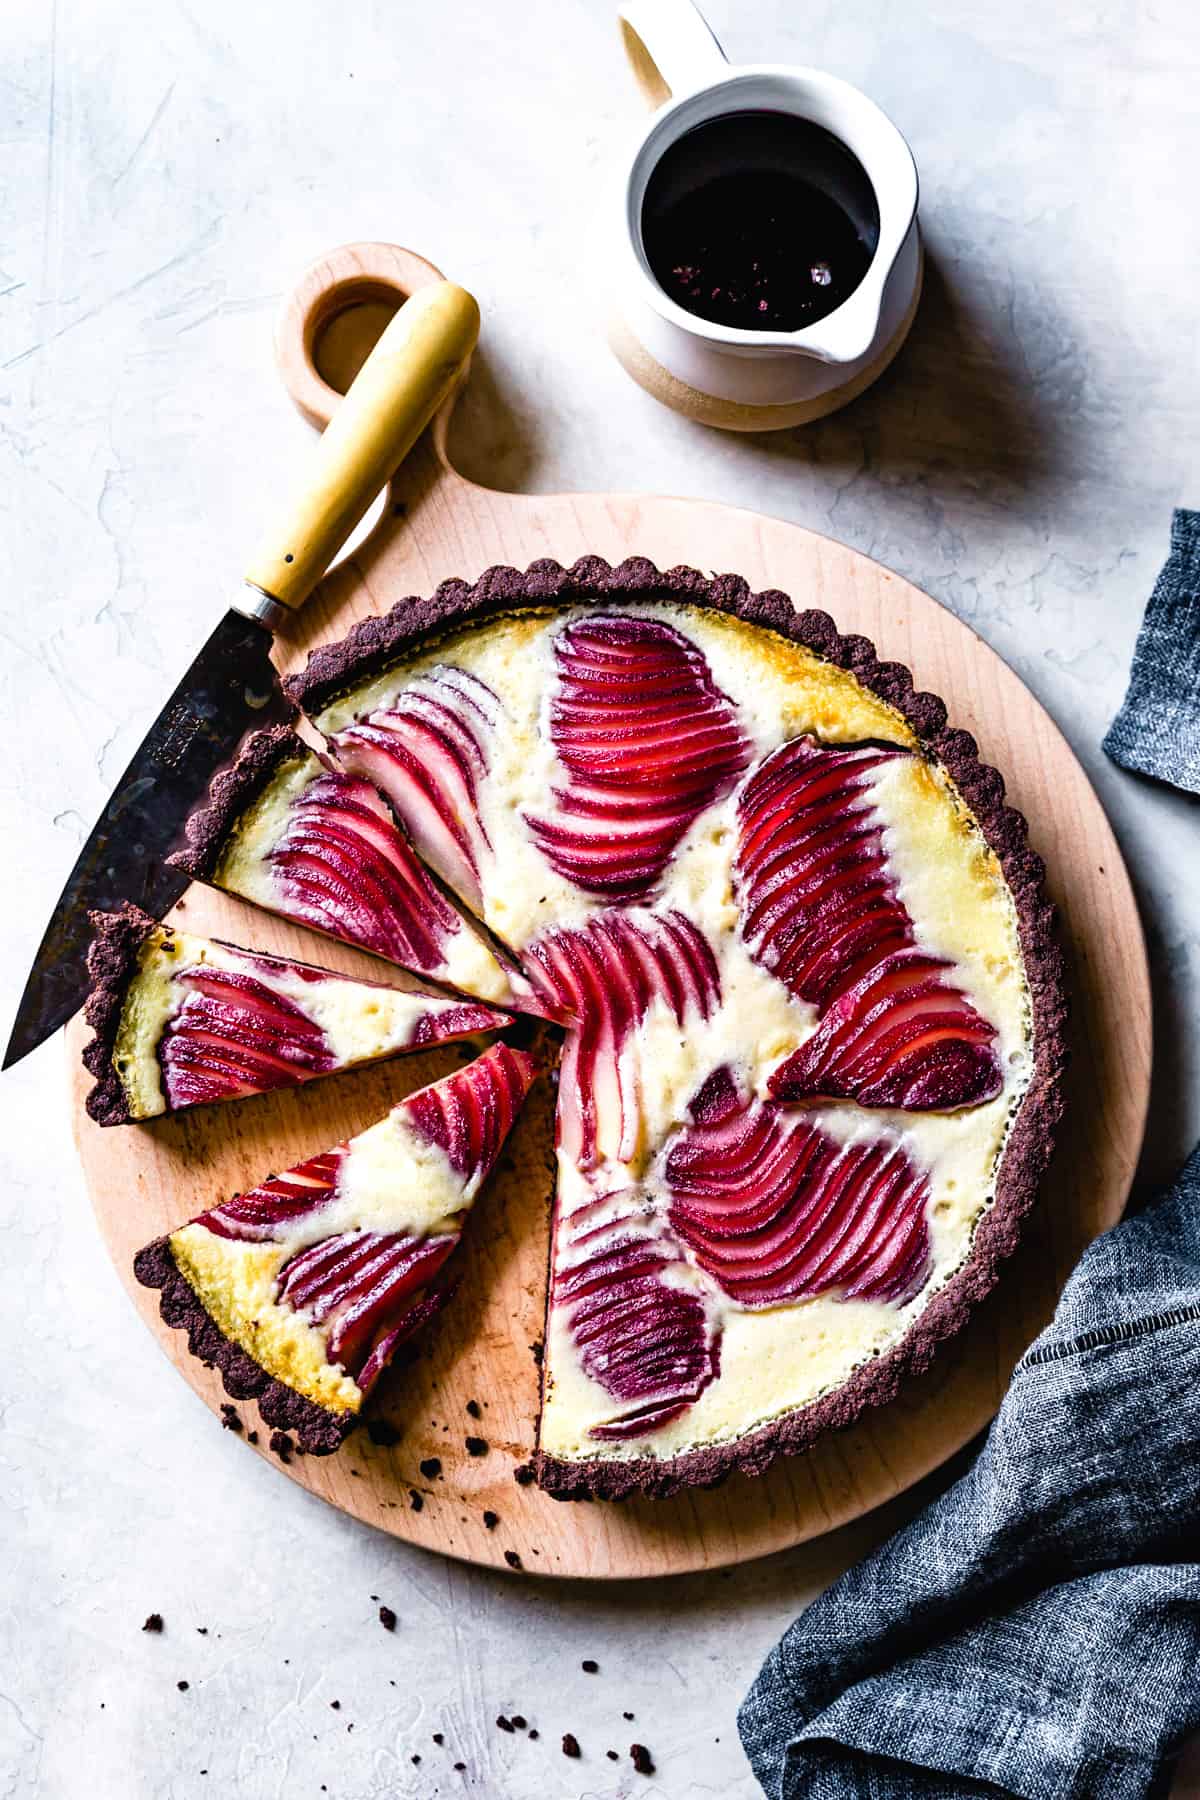 red wine poached pears have been baked into a tart with a chocolate crust and custard filling